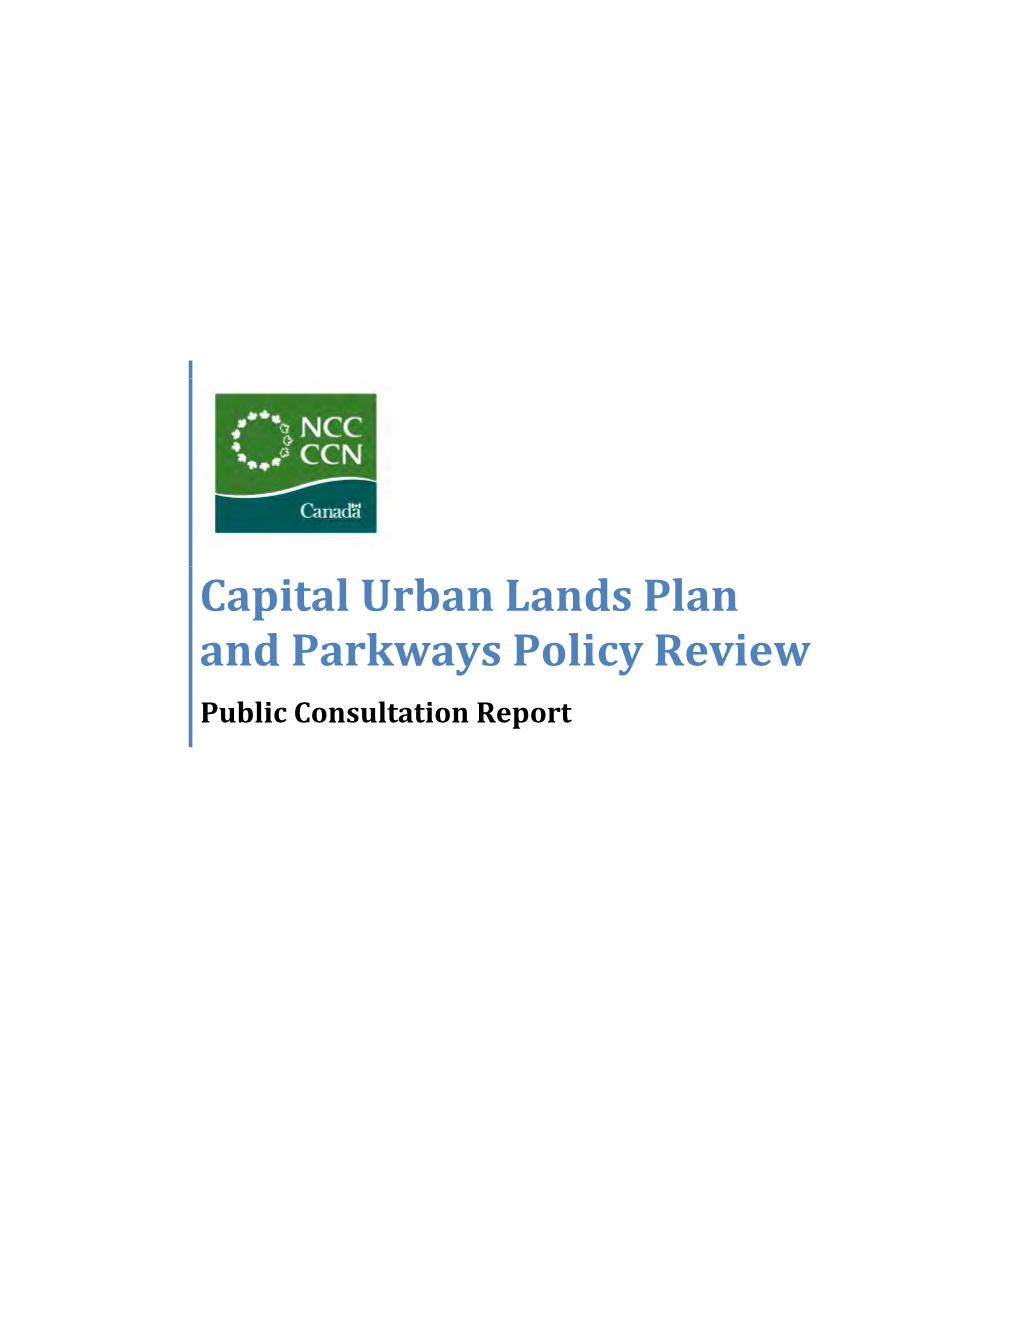 Capital Urban Lands Plan and Parkways Policy Review